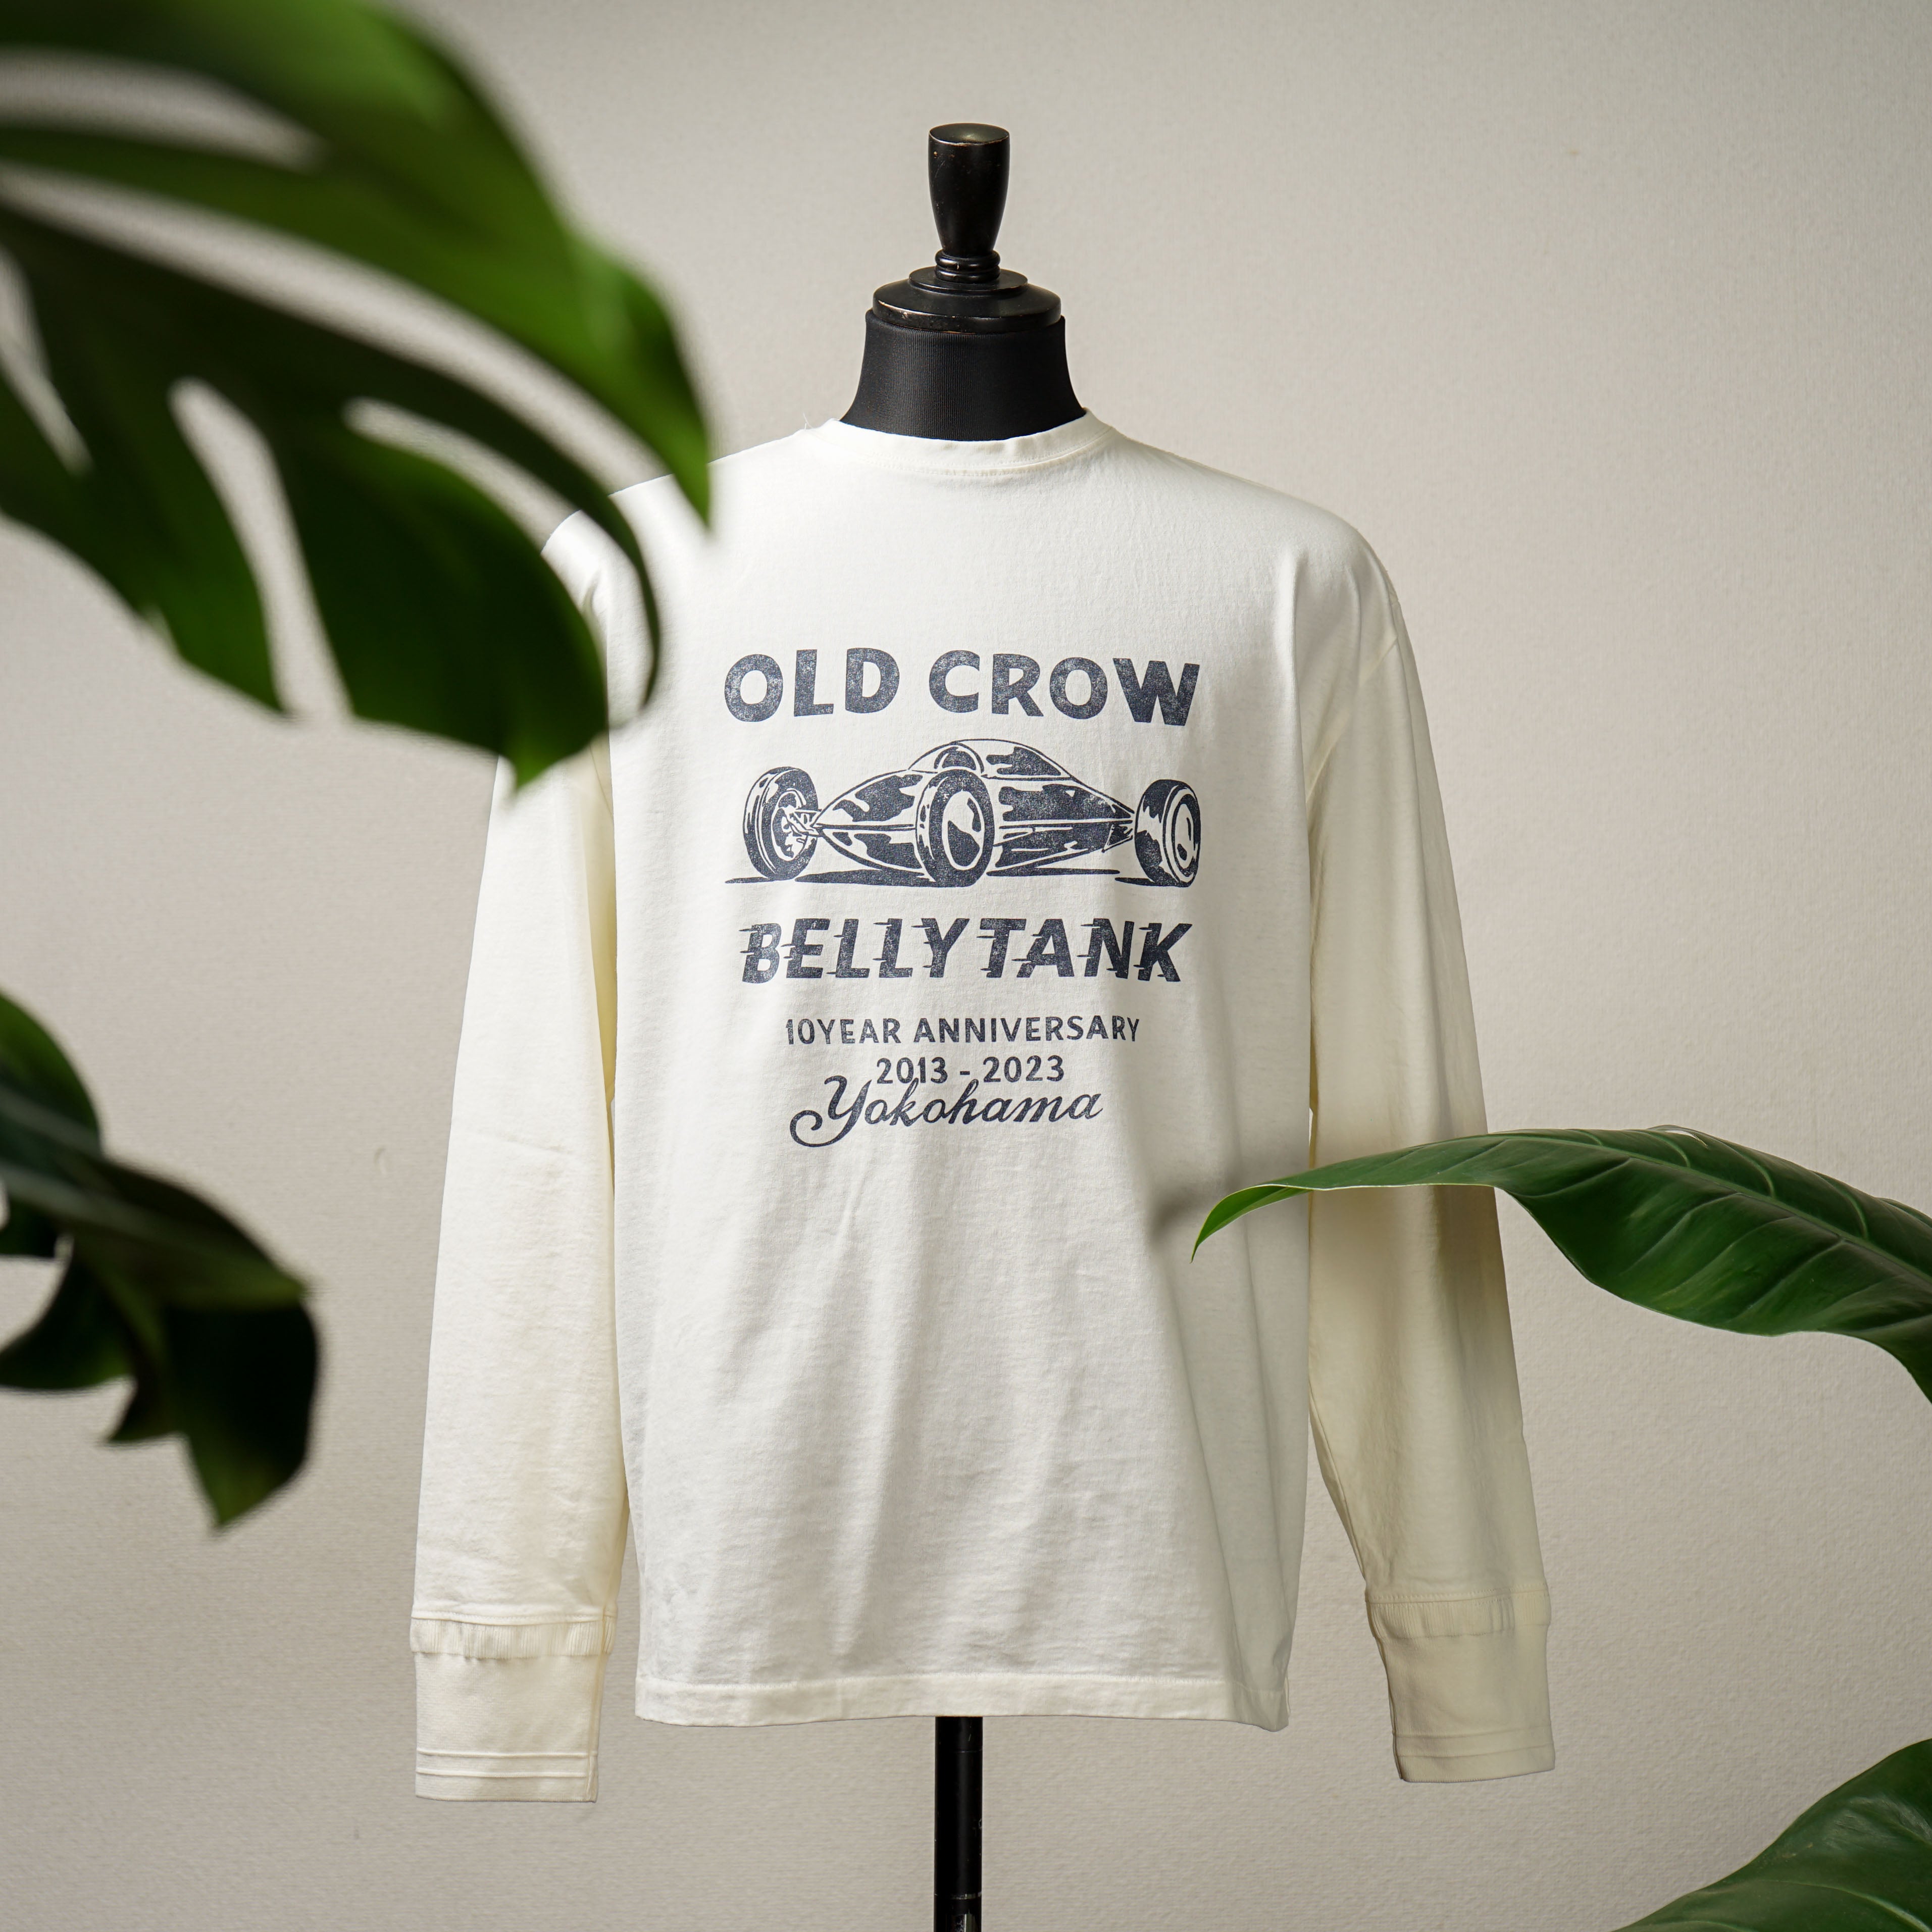 OLD CROW – GLADHAND & Co.